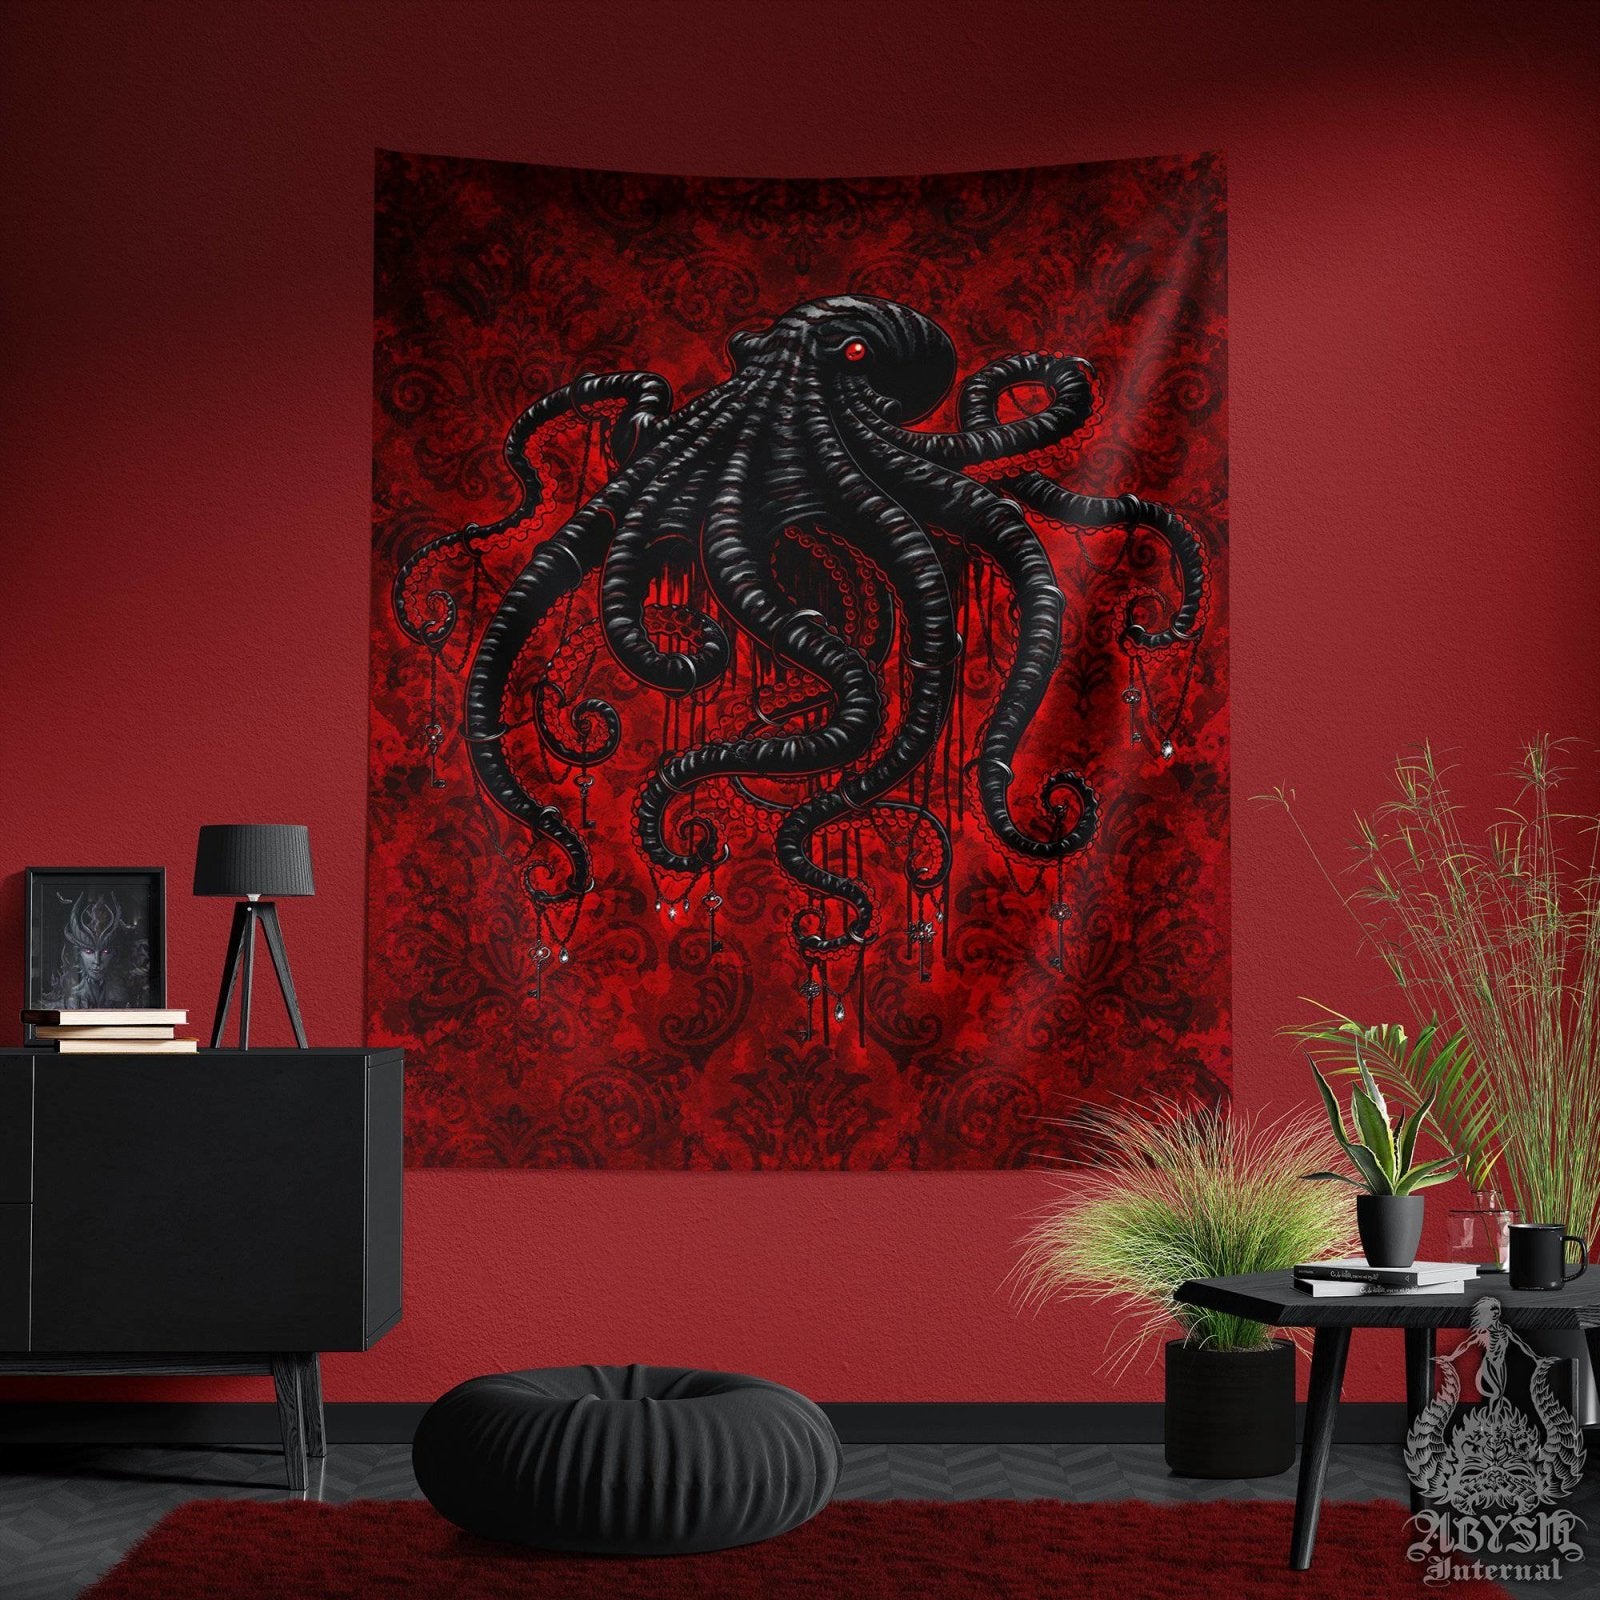 Gothic Tapestry, Octopus Wall Hanging, Goth Home Decor, Art Print - Bloody Black - Abysm Internal